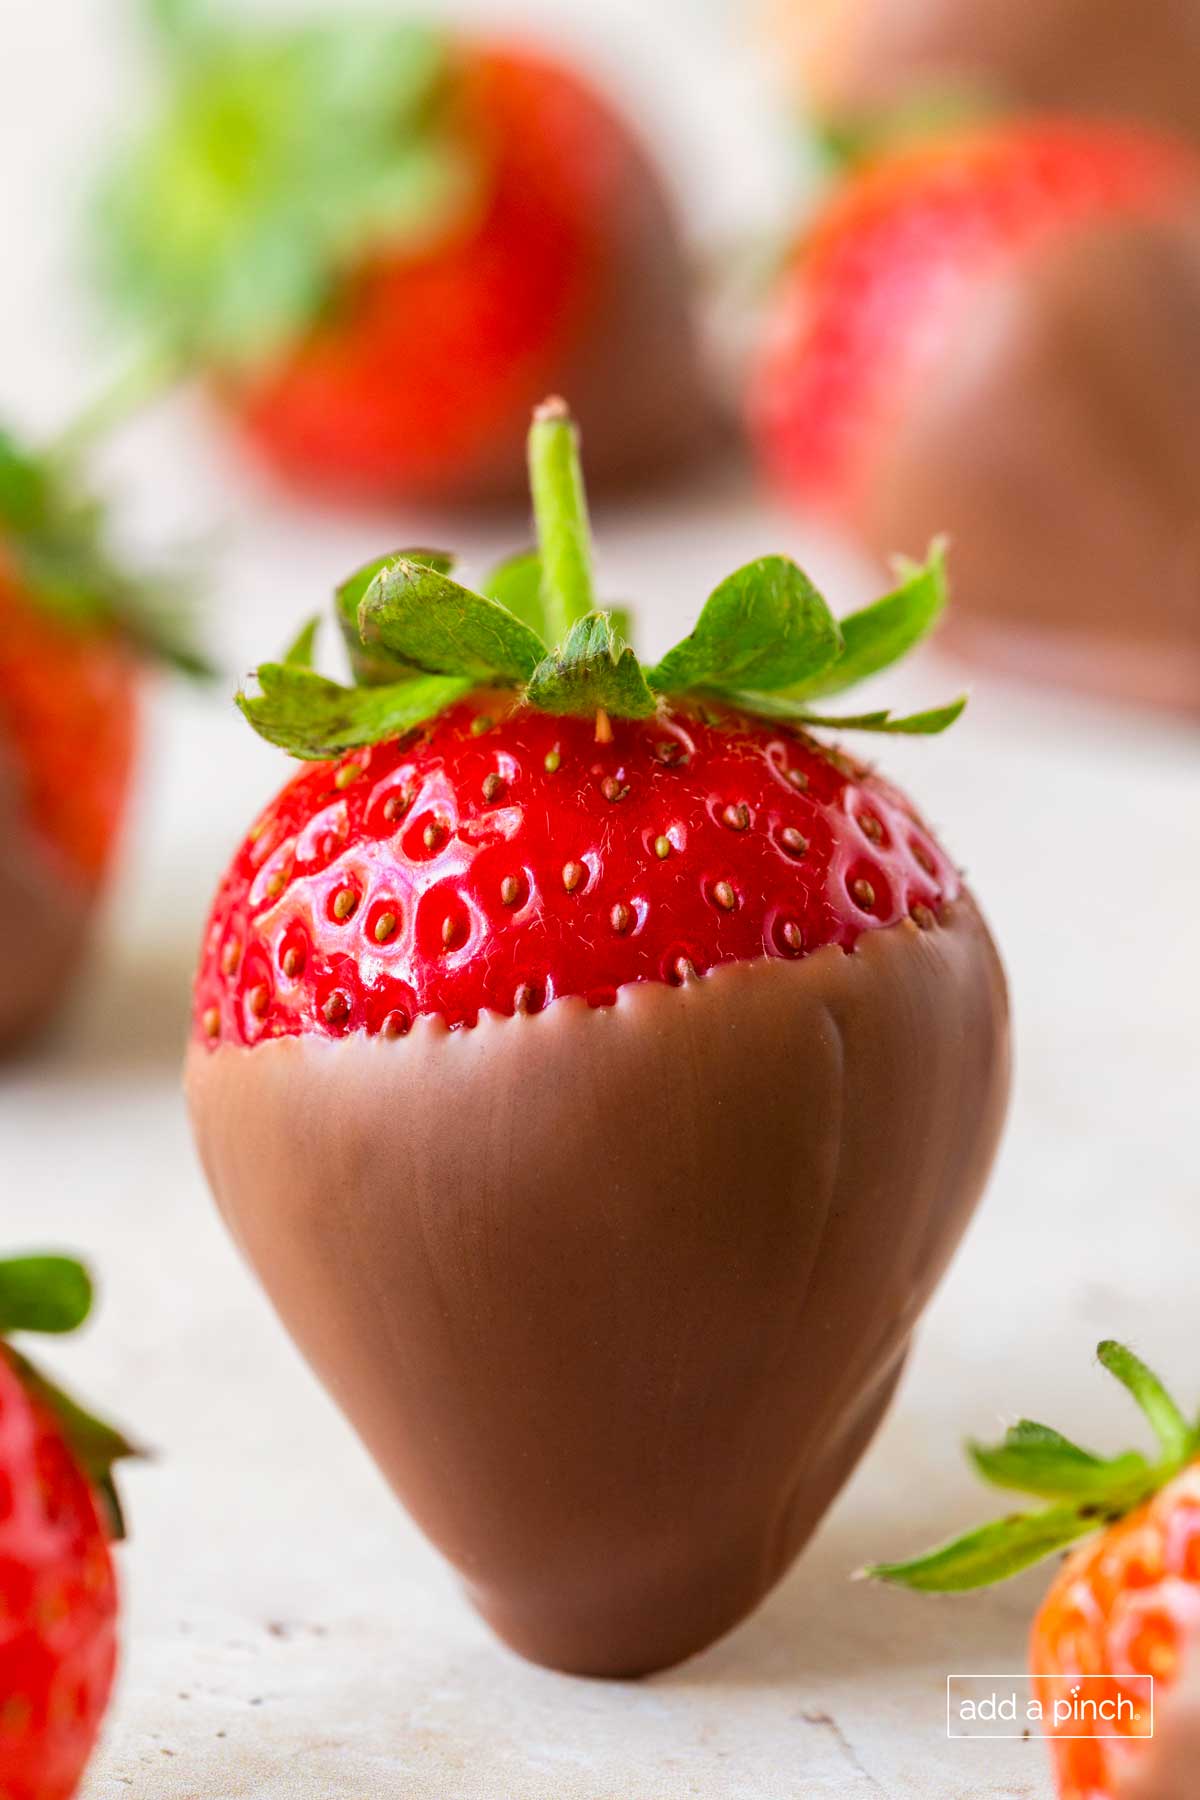 close photo of a single chocolate covered strawberry on a platter with other strawberries.